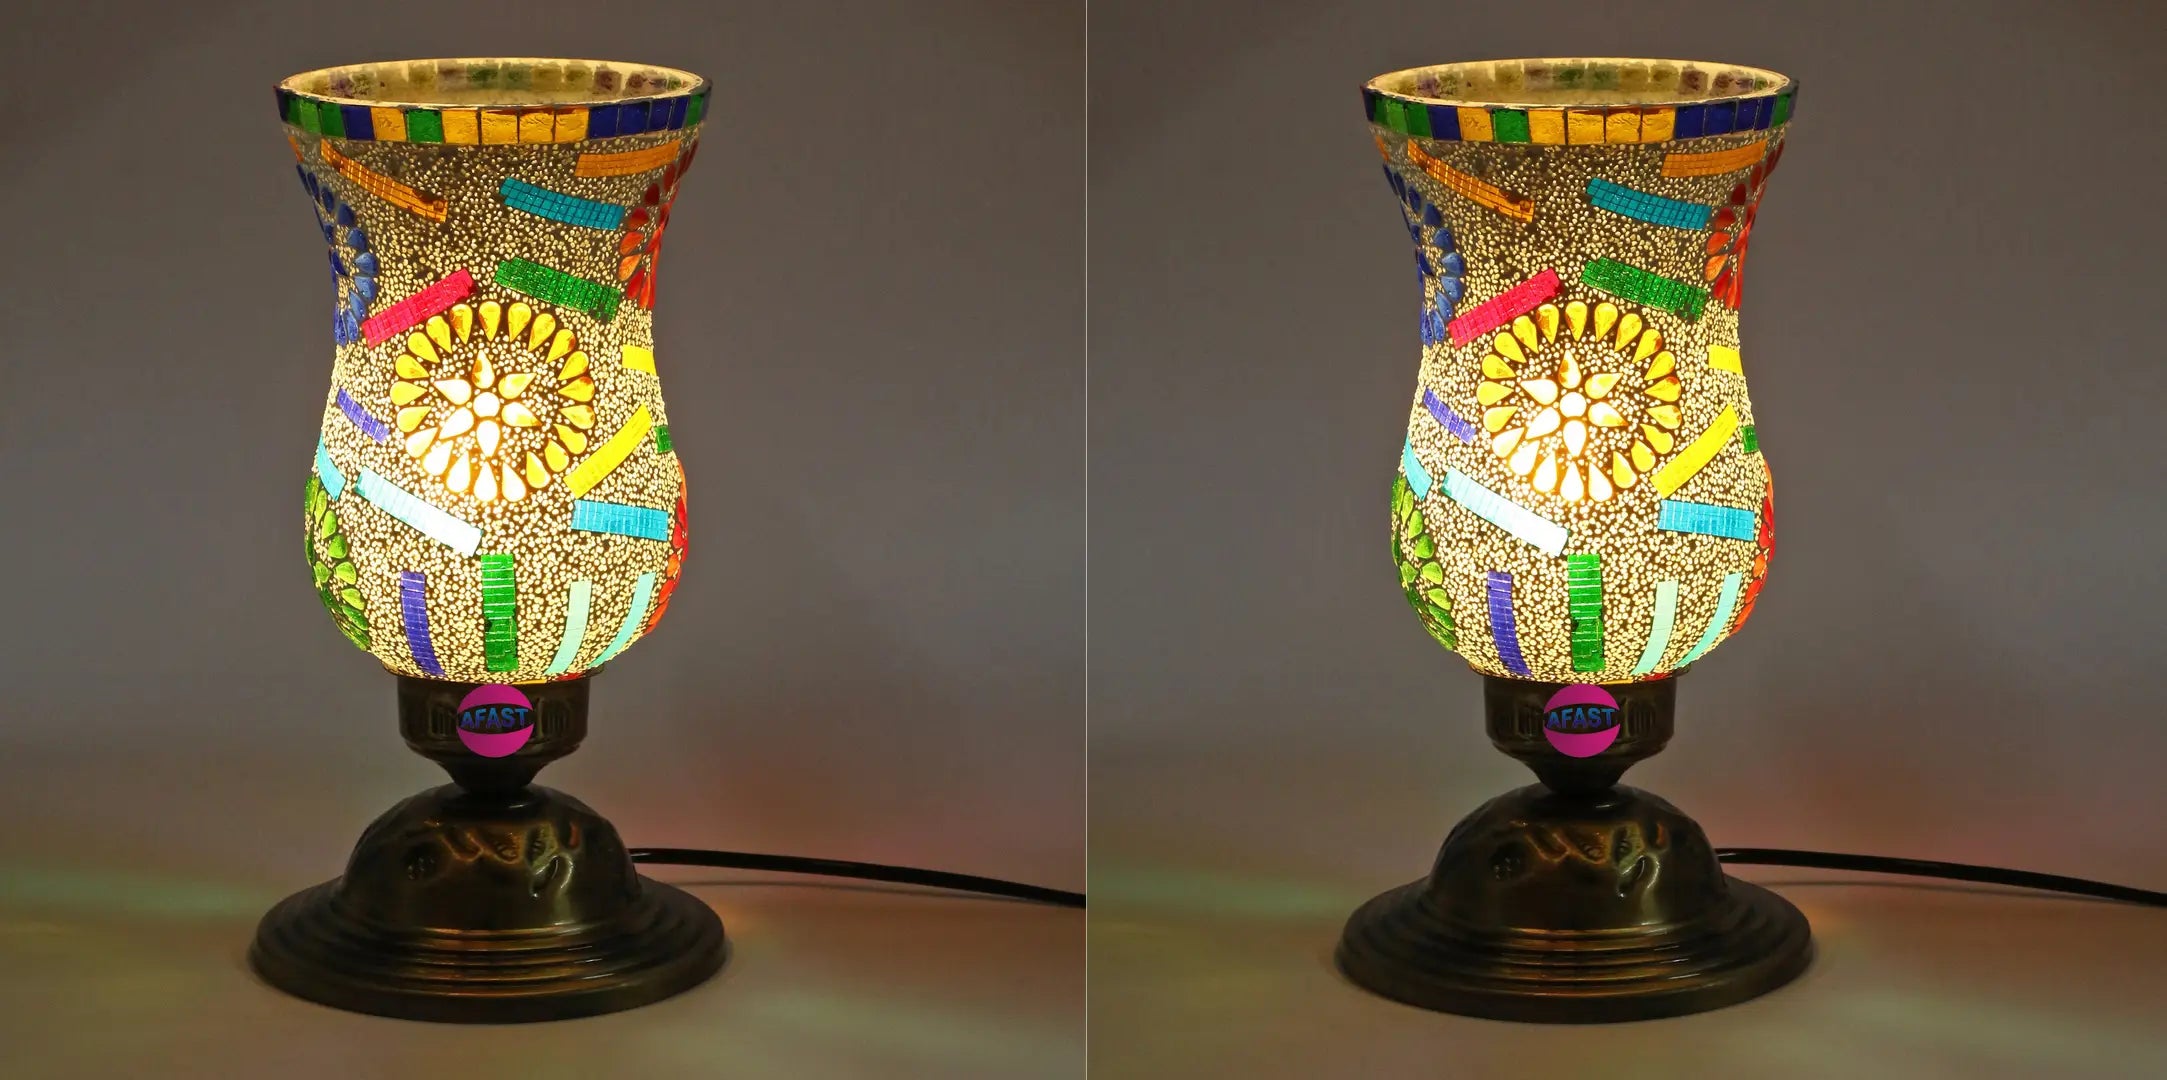 Designer Decorative Metal Table Lamp With Hand Decorative Colorful Glass Shade, Pack of 2